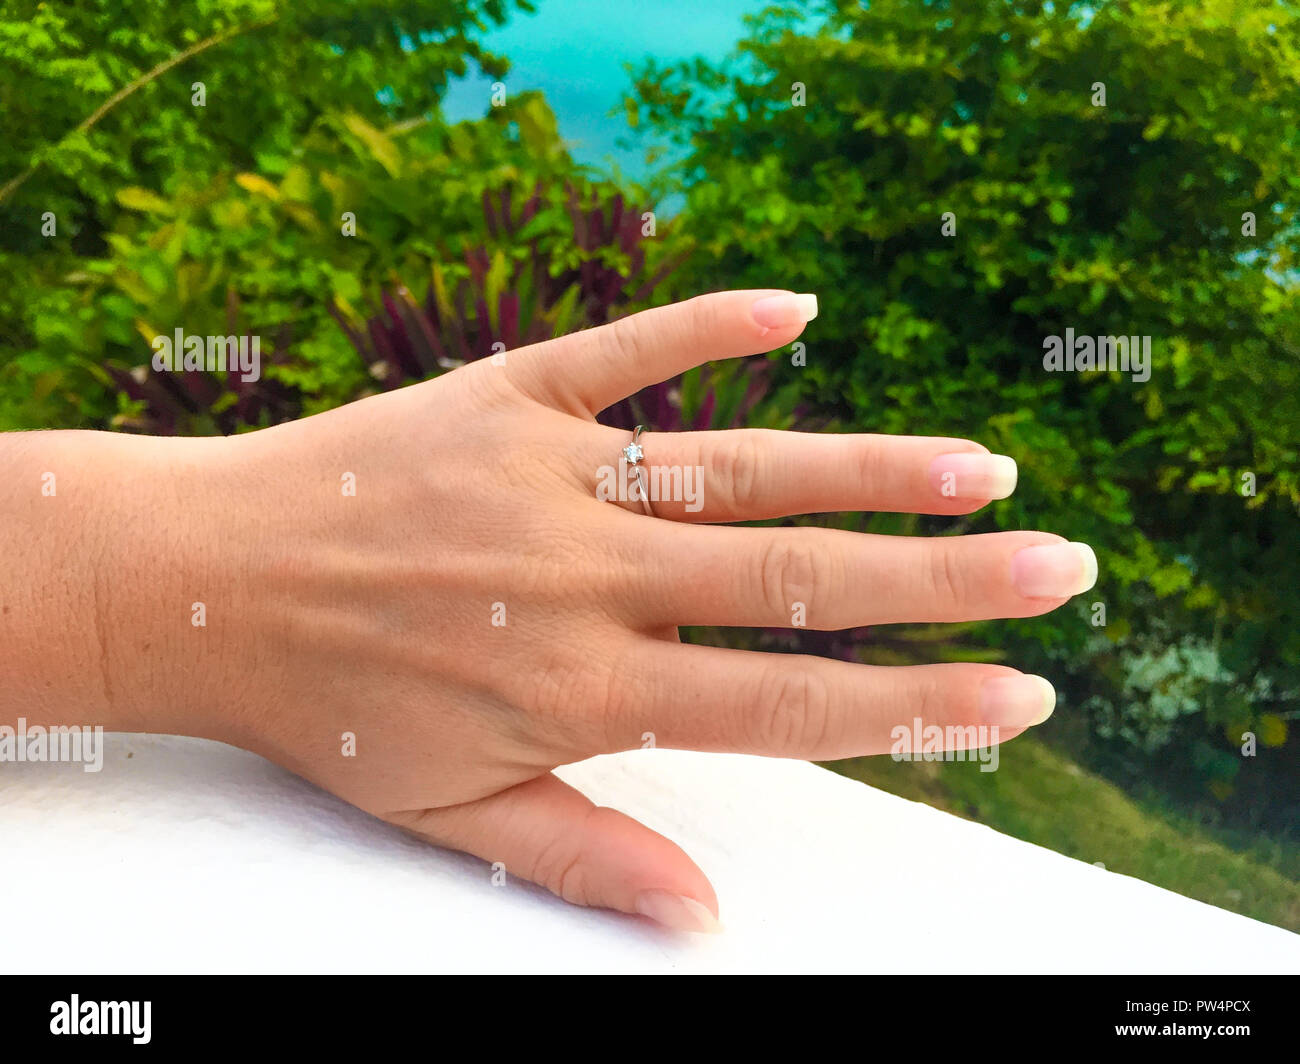 3,339 Right Hand Ring Images, Stock Photos, 3D objects, & Vectors |  Shutterstock